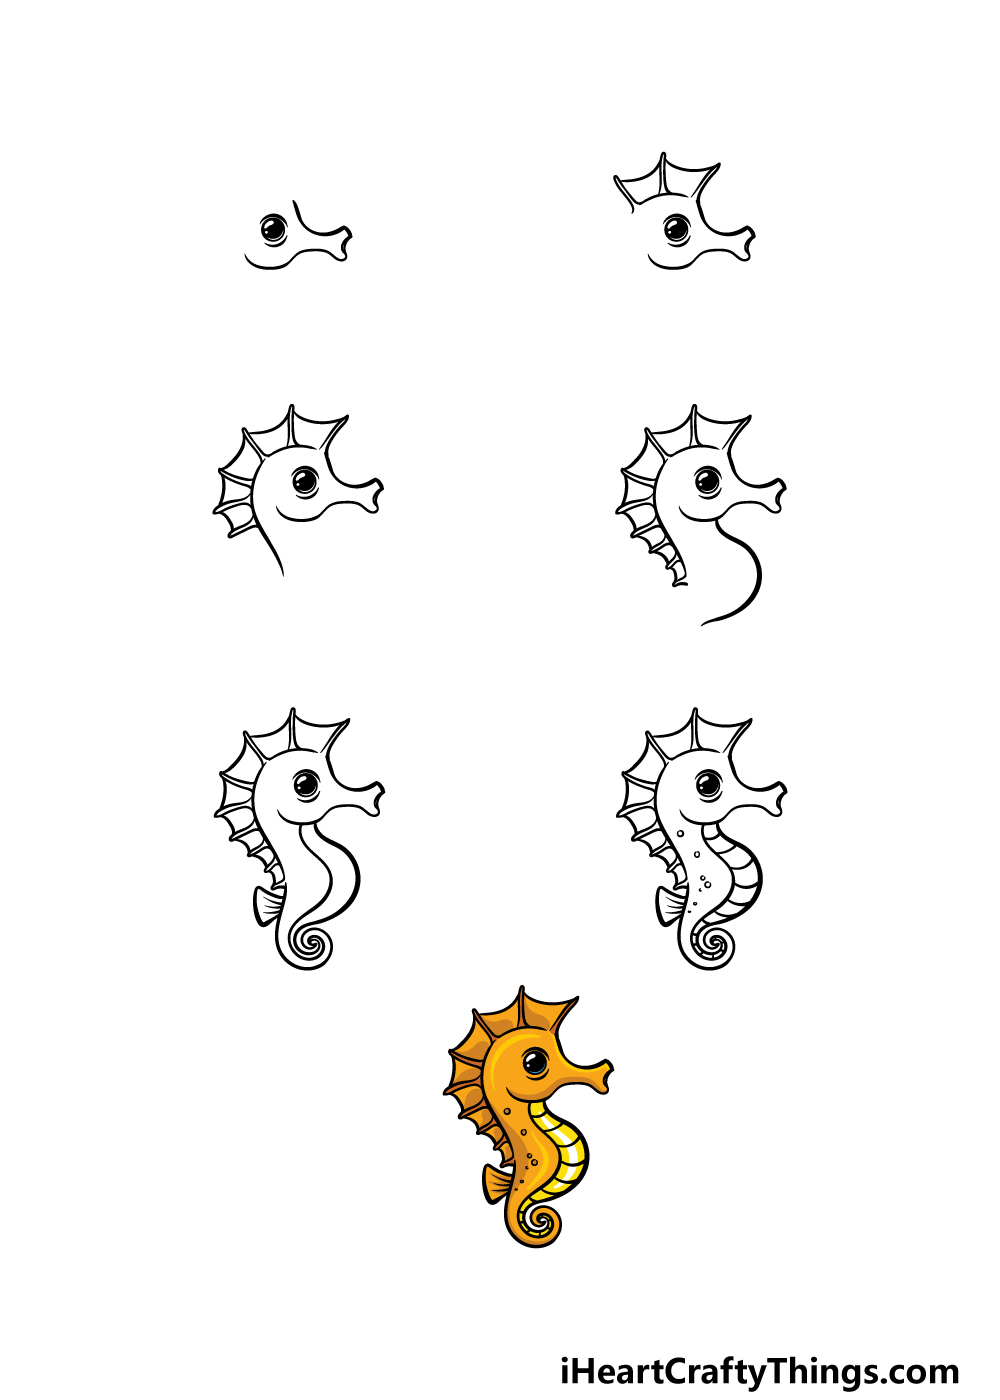 Cartoon Seahorse Drawing - How To Draw A Cartoon Seahorse Step By Step!